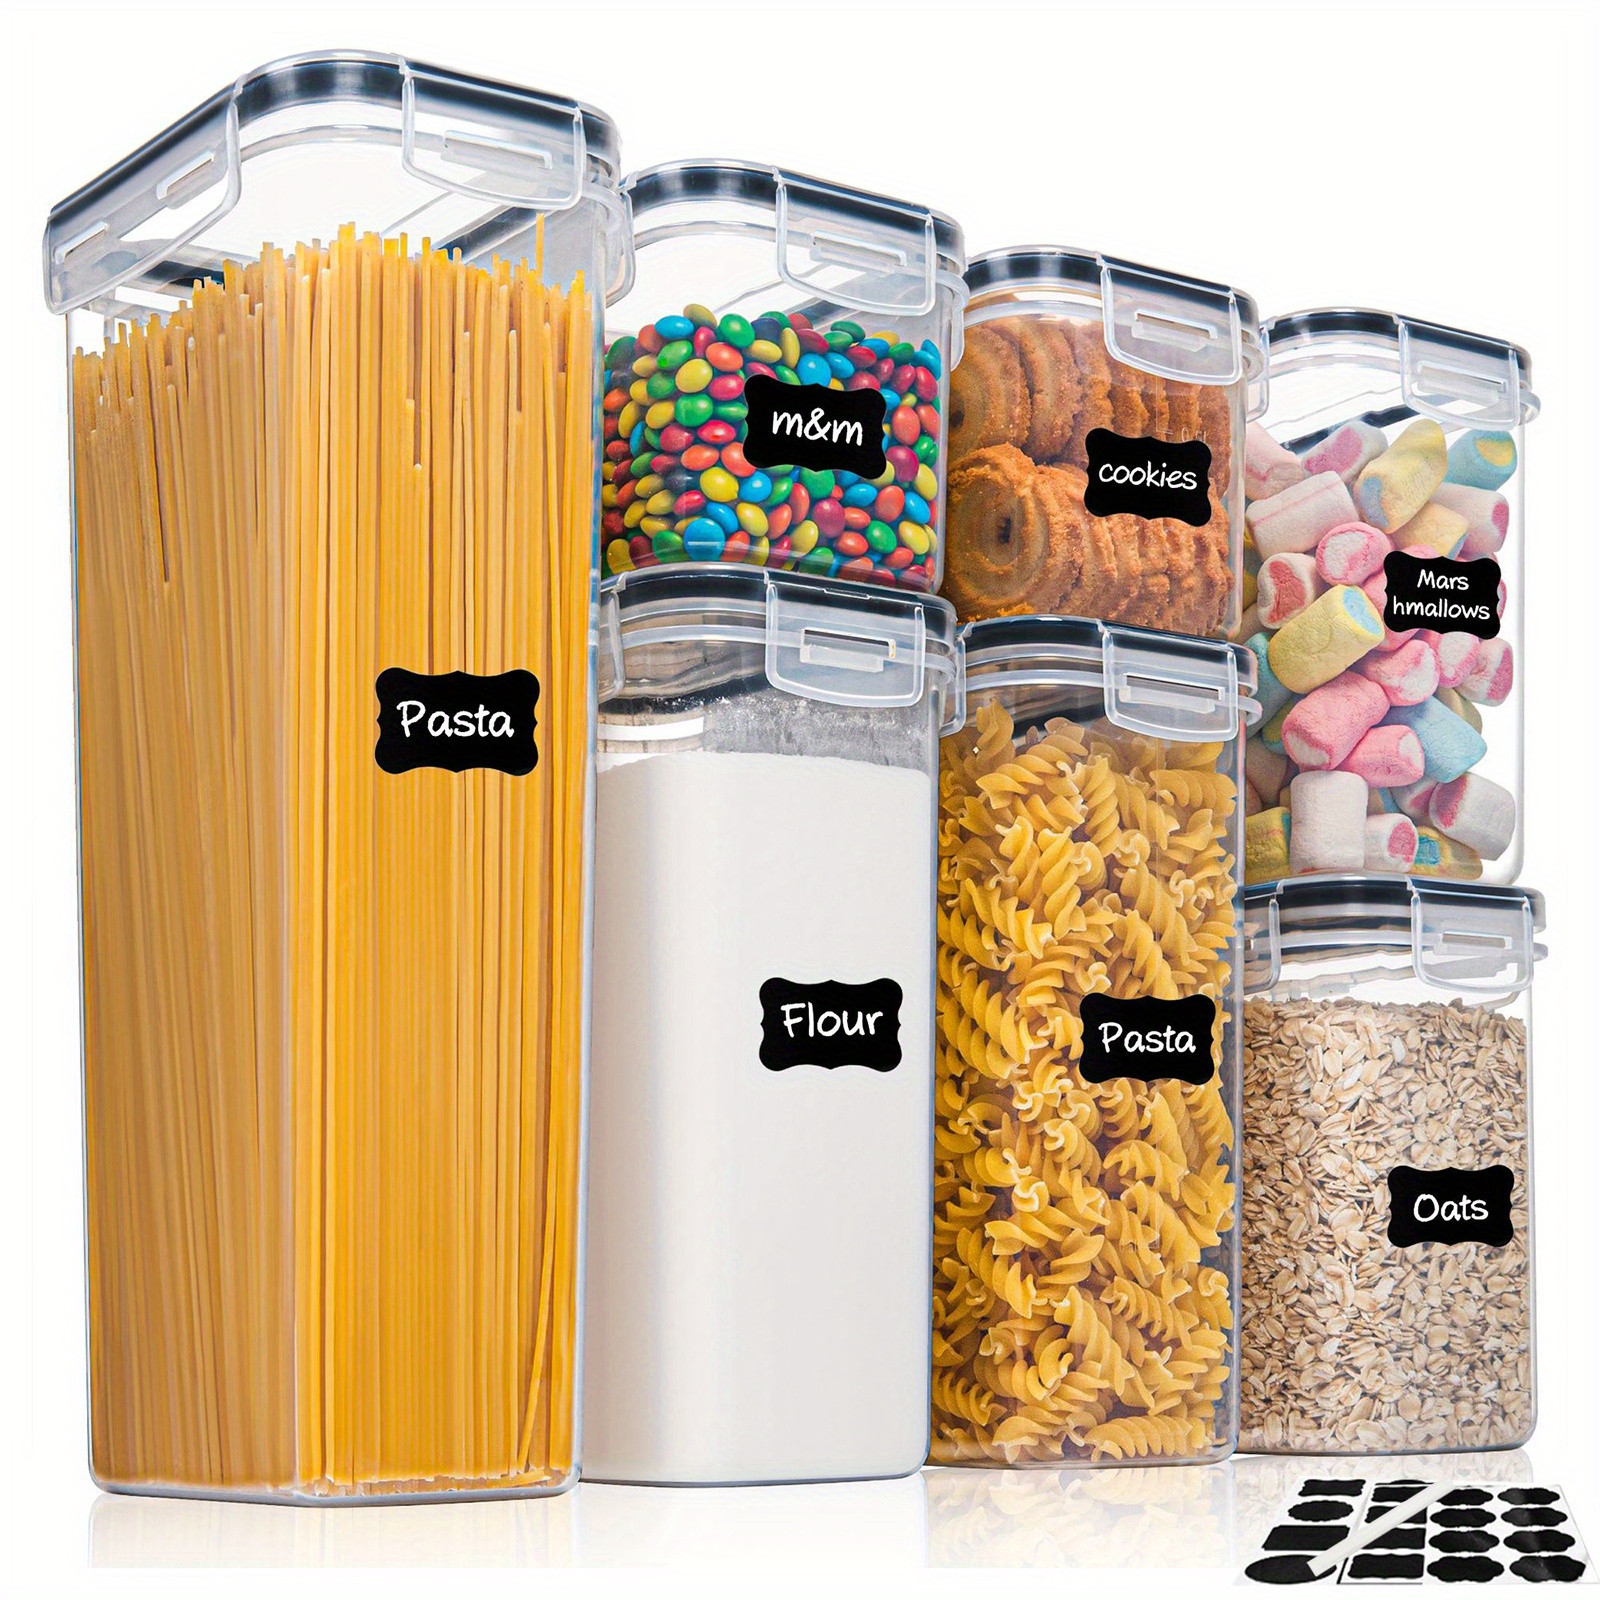 Organize Your Kitchen Pantry With This 4/7-Piece Airtight Food Storage Container Set - BPA Free, Dishwasher Safe, And Includes Labels!